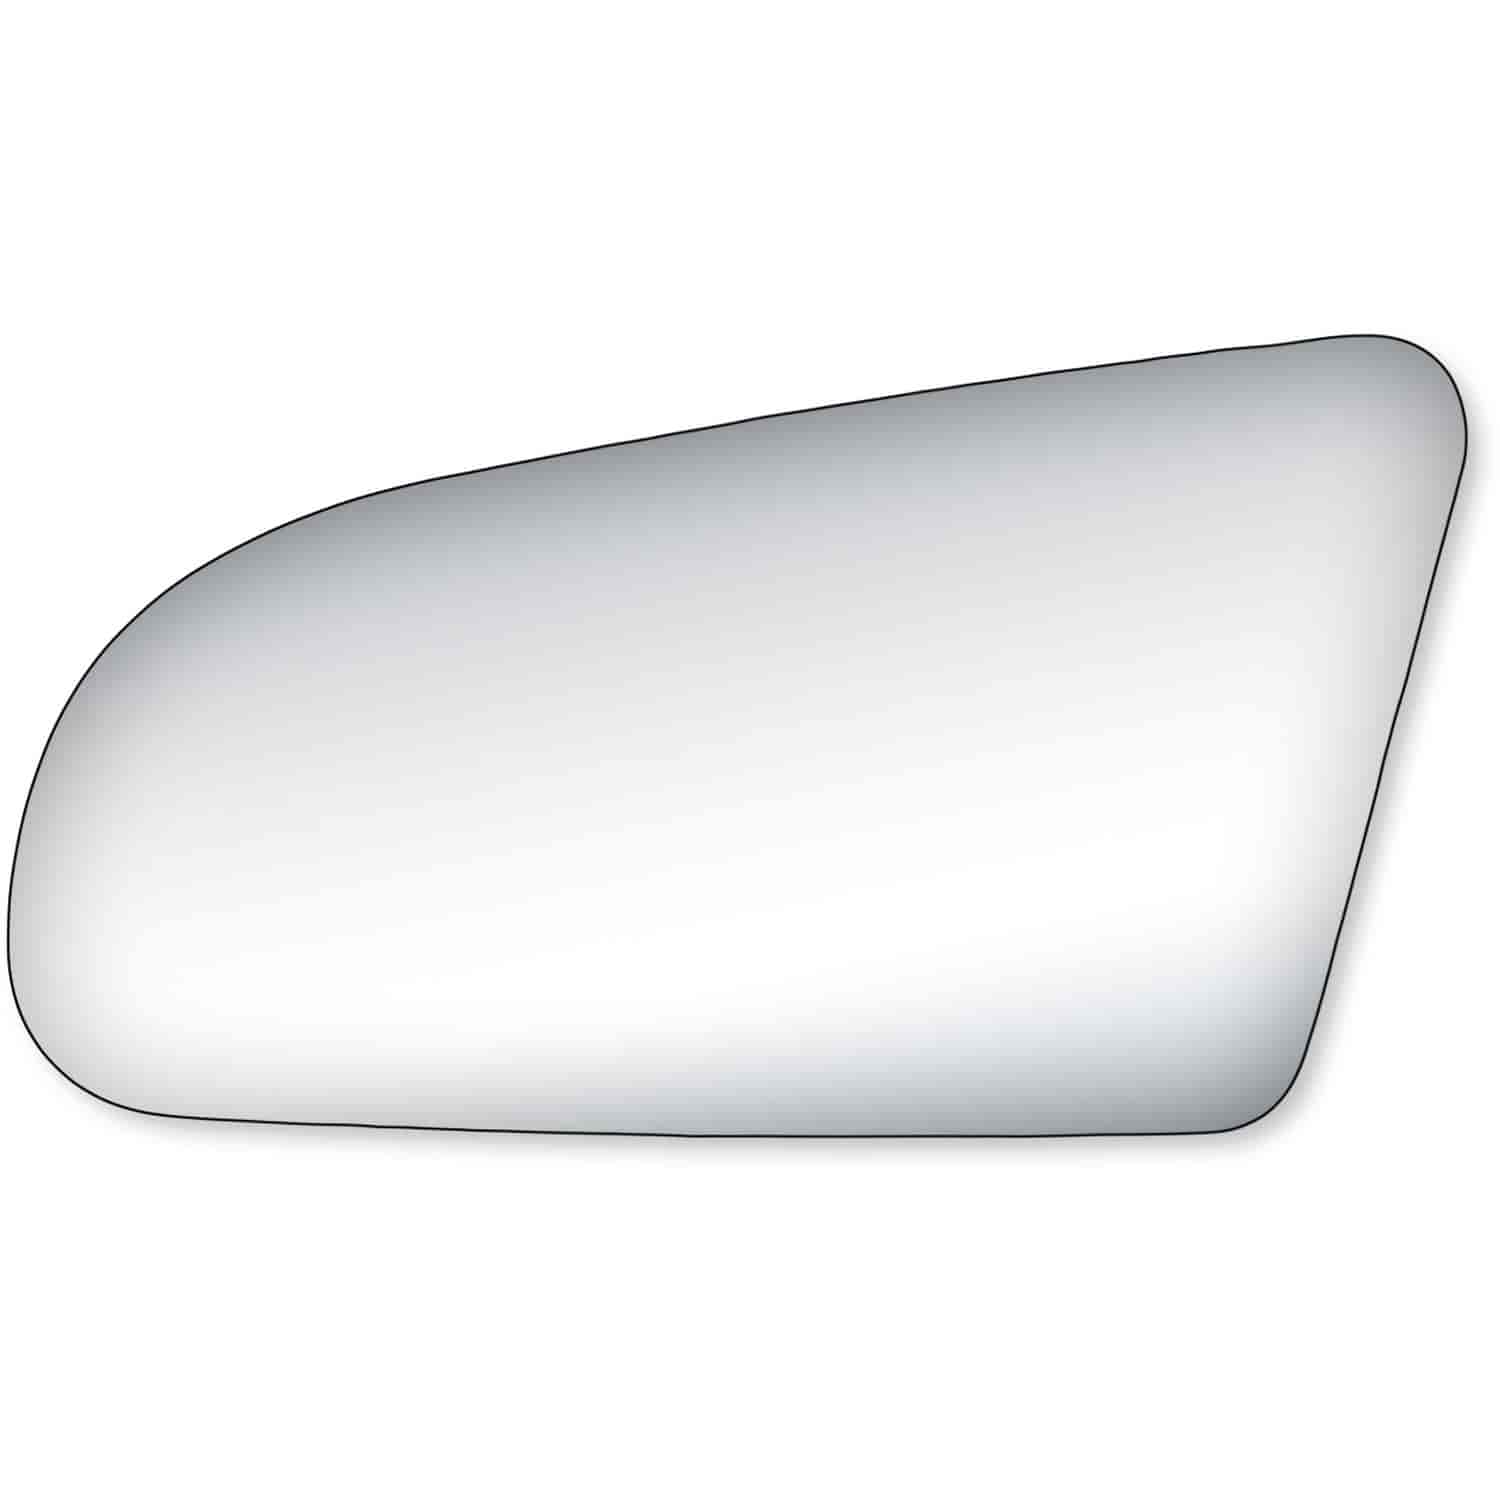 Replacement Glass for 87-91 LeSabre; 87-91 Delta 88